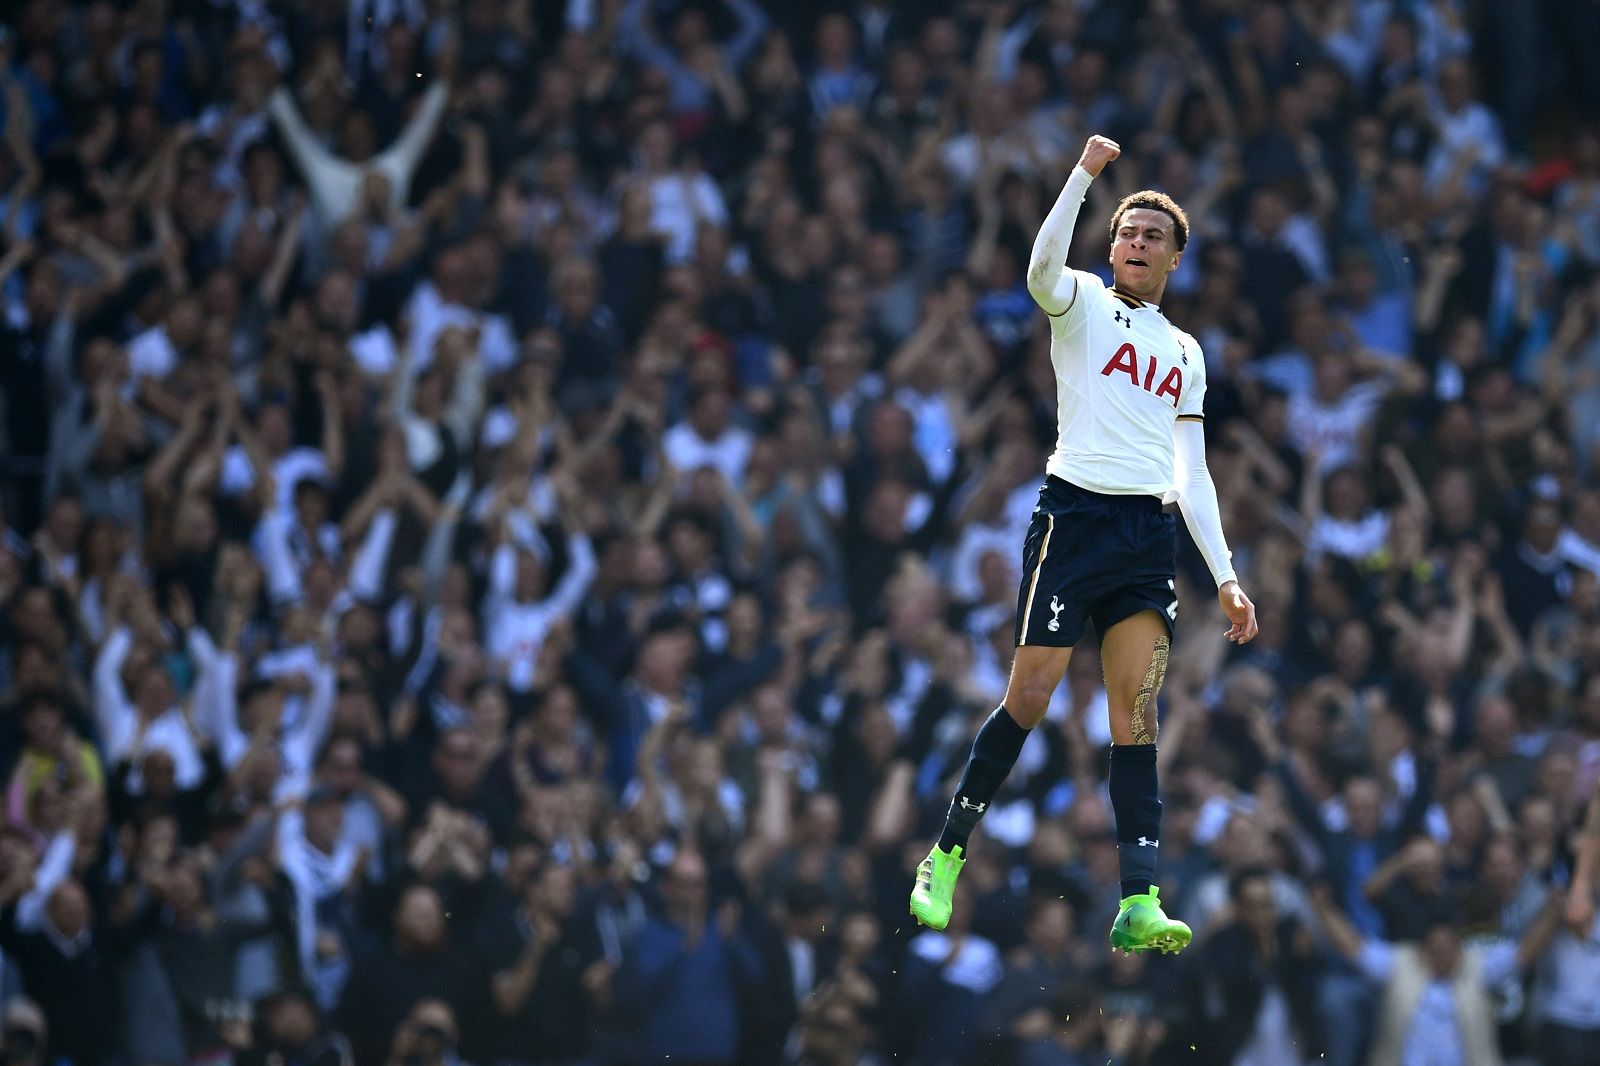 LONDON, ENGLAND - APRIL 08: Dele Alli of Tottenham Hotspur celebrates scoring his sides first goal during the Premier League match between Tottenham Hotspur and Watford at White Hart Lane on April 8, 2017 in London, England.  (Photo by Dan Mullan/Getty Images)